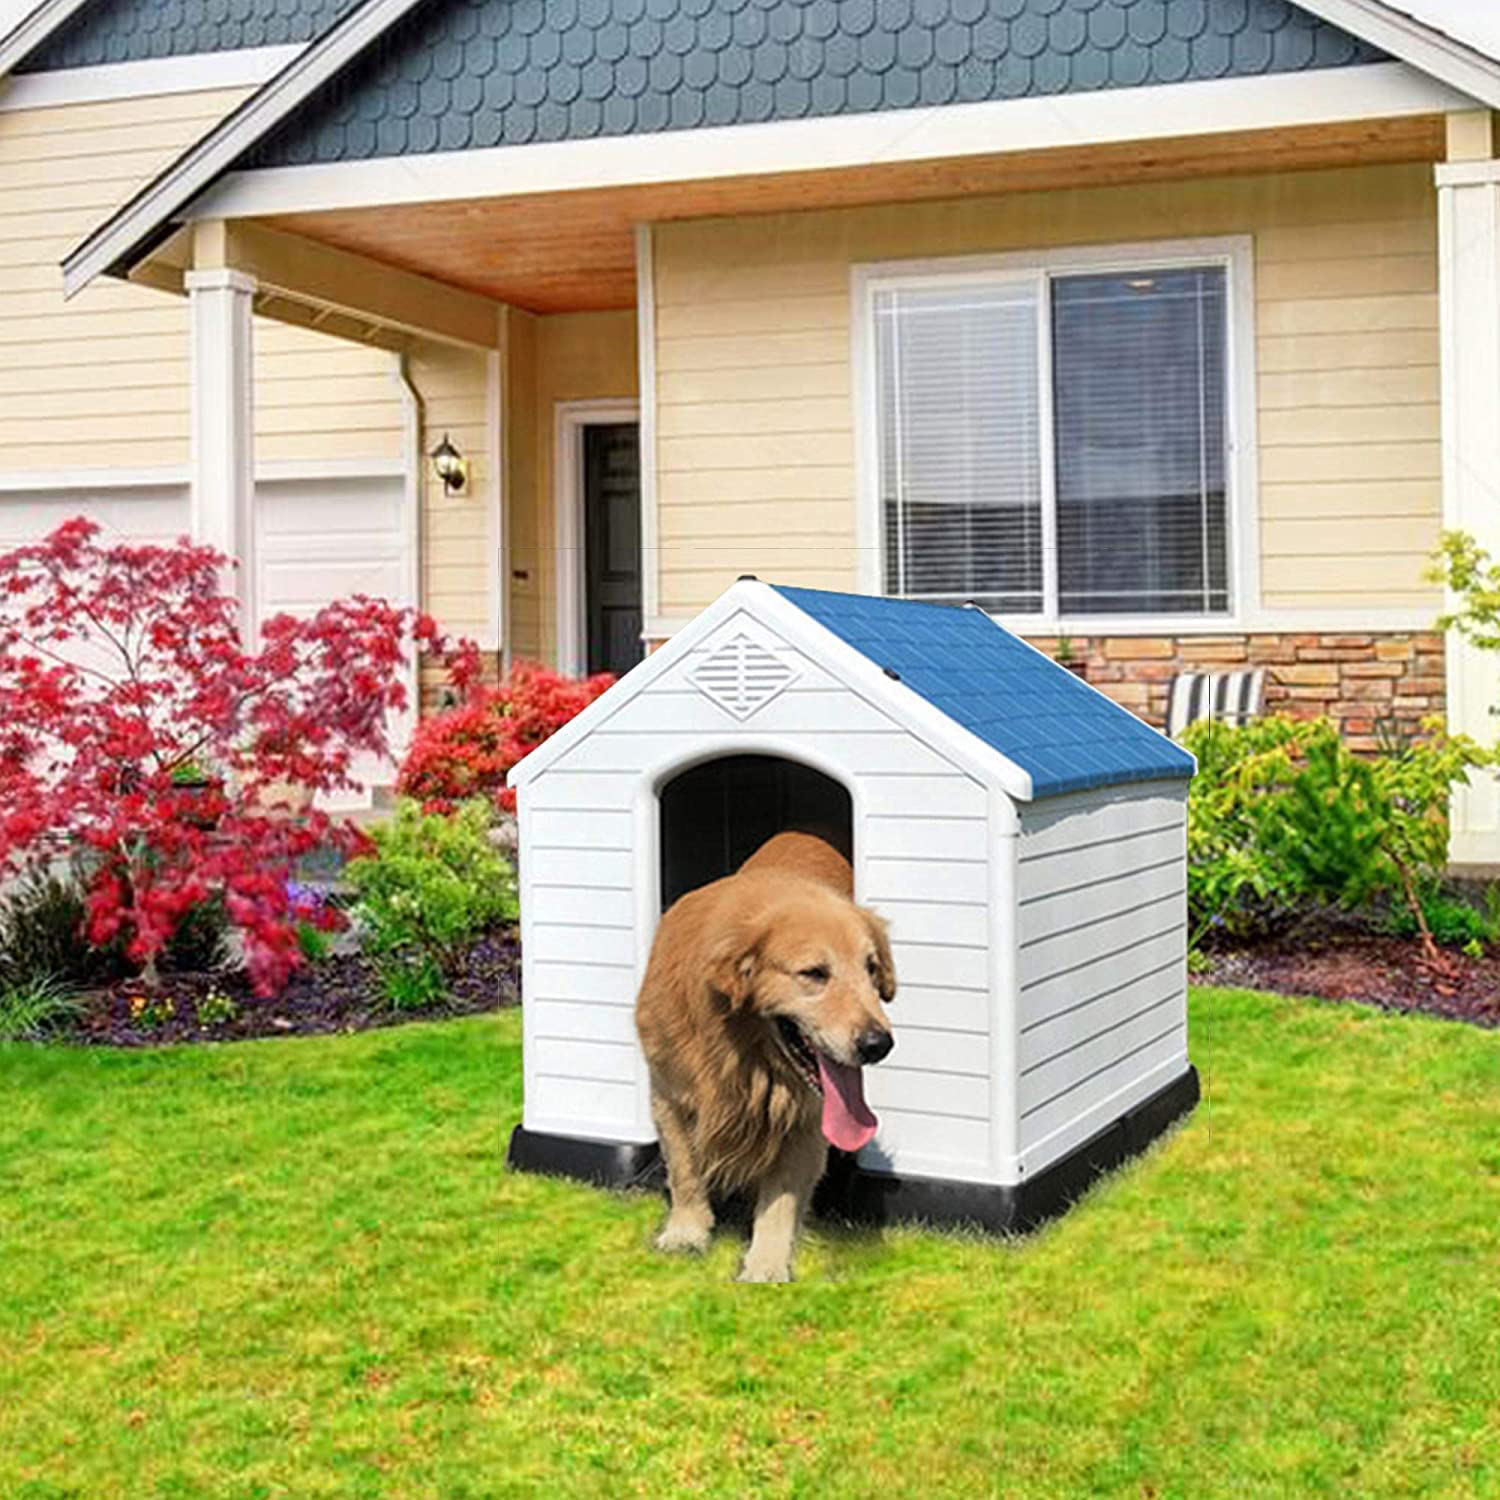 Saicool Medium Dog House Kennel - Weather & Water Resistant Waterproof Ventilate Plastic Durable Indoor Outdoor Pet House Puppy Shelter with Air Vents and Elevated Floor